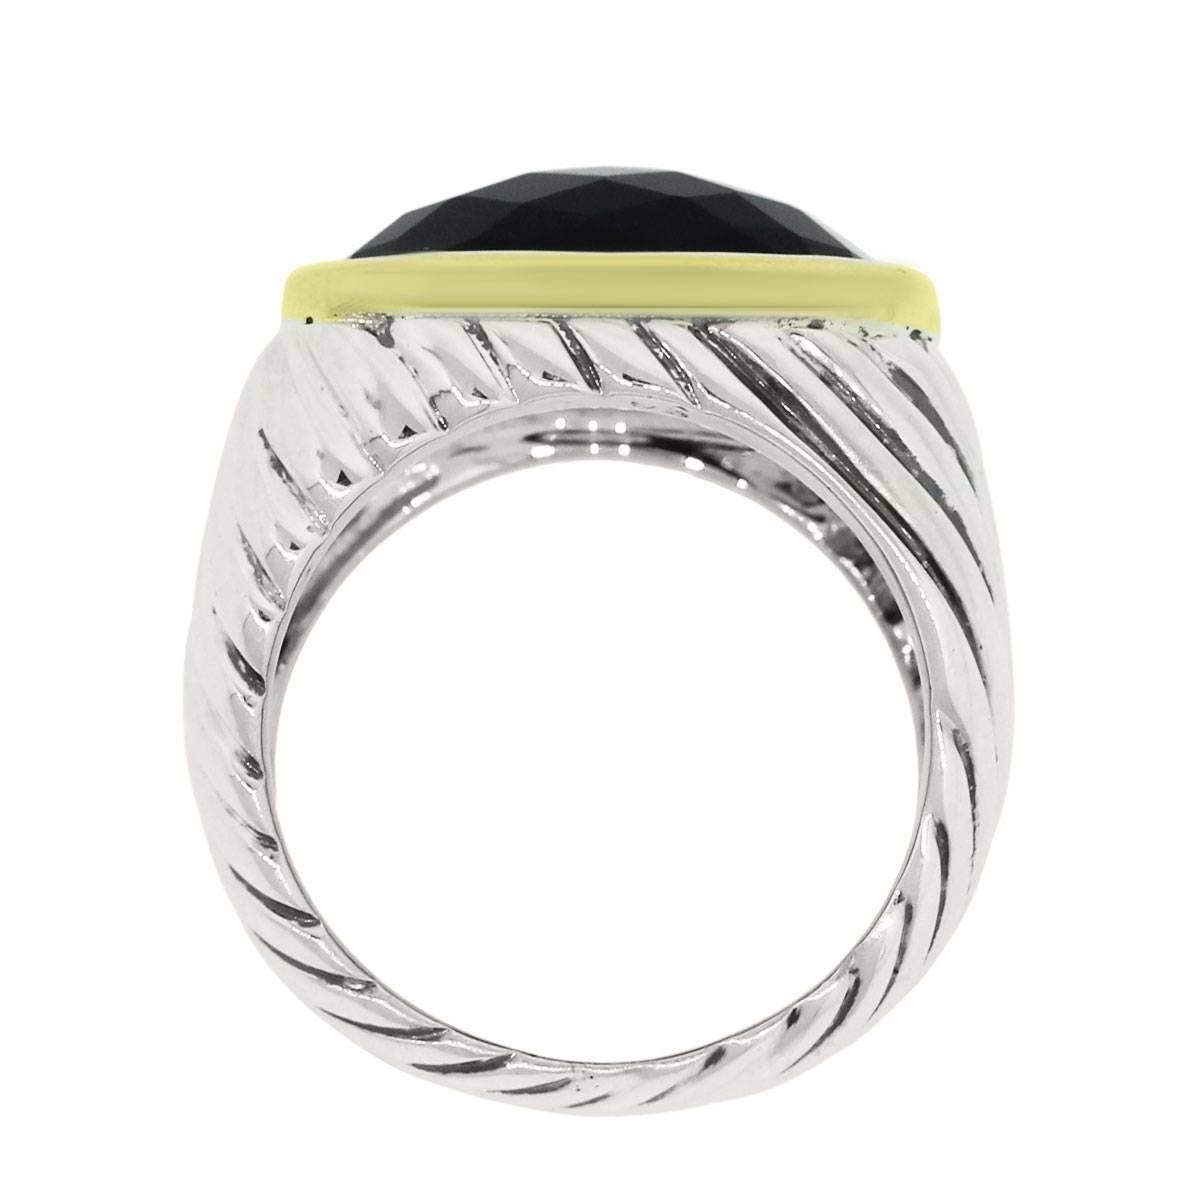 Designer: David Yurman
Material: Sterling silver and 18k yellow gold
Gemstone Details: Faceted black onyx measuring approximately 15.35mm x 11.11mm
Size: 6.75 (can be sized)
Total Weight: 11.4g (7.3dwt)
Measurements: 1.02″ x 0.58″ x 0.89″
Additional